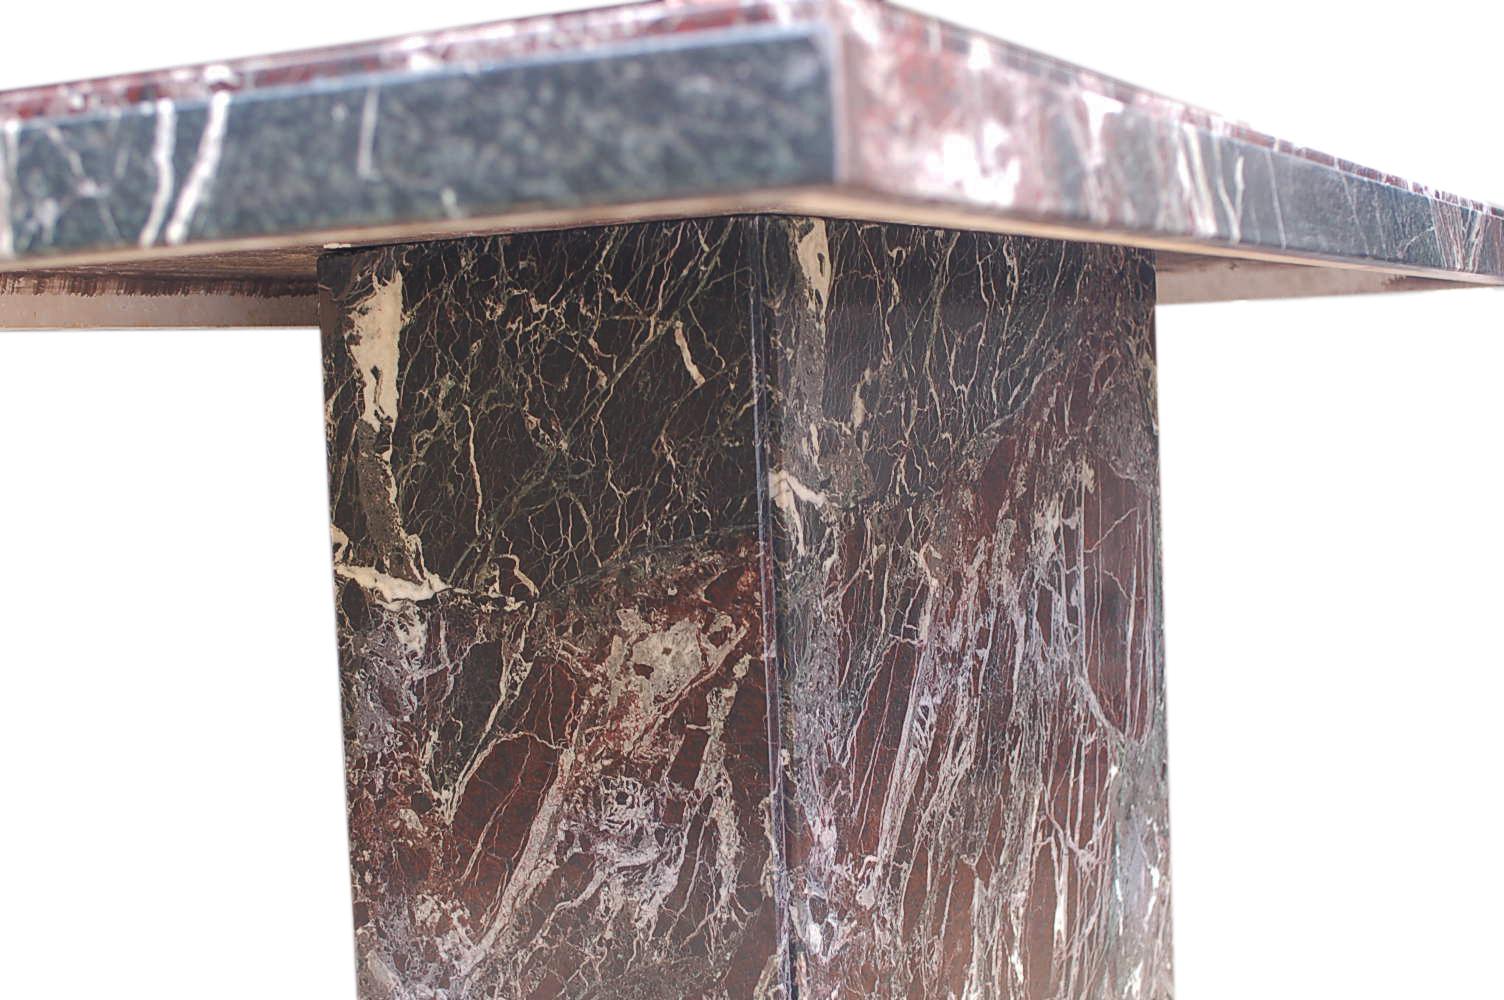 Late 20th Century Midcentury Italian Modern Solid Marble Slab Dining Table in Black and Burgundy